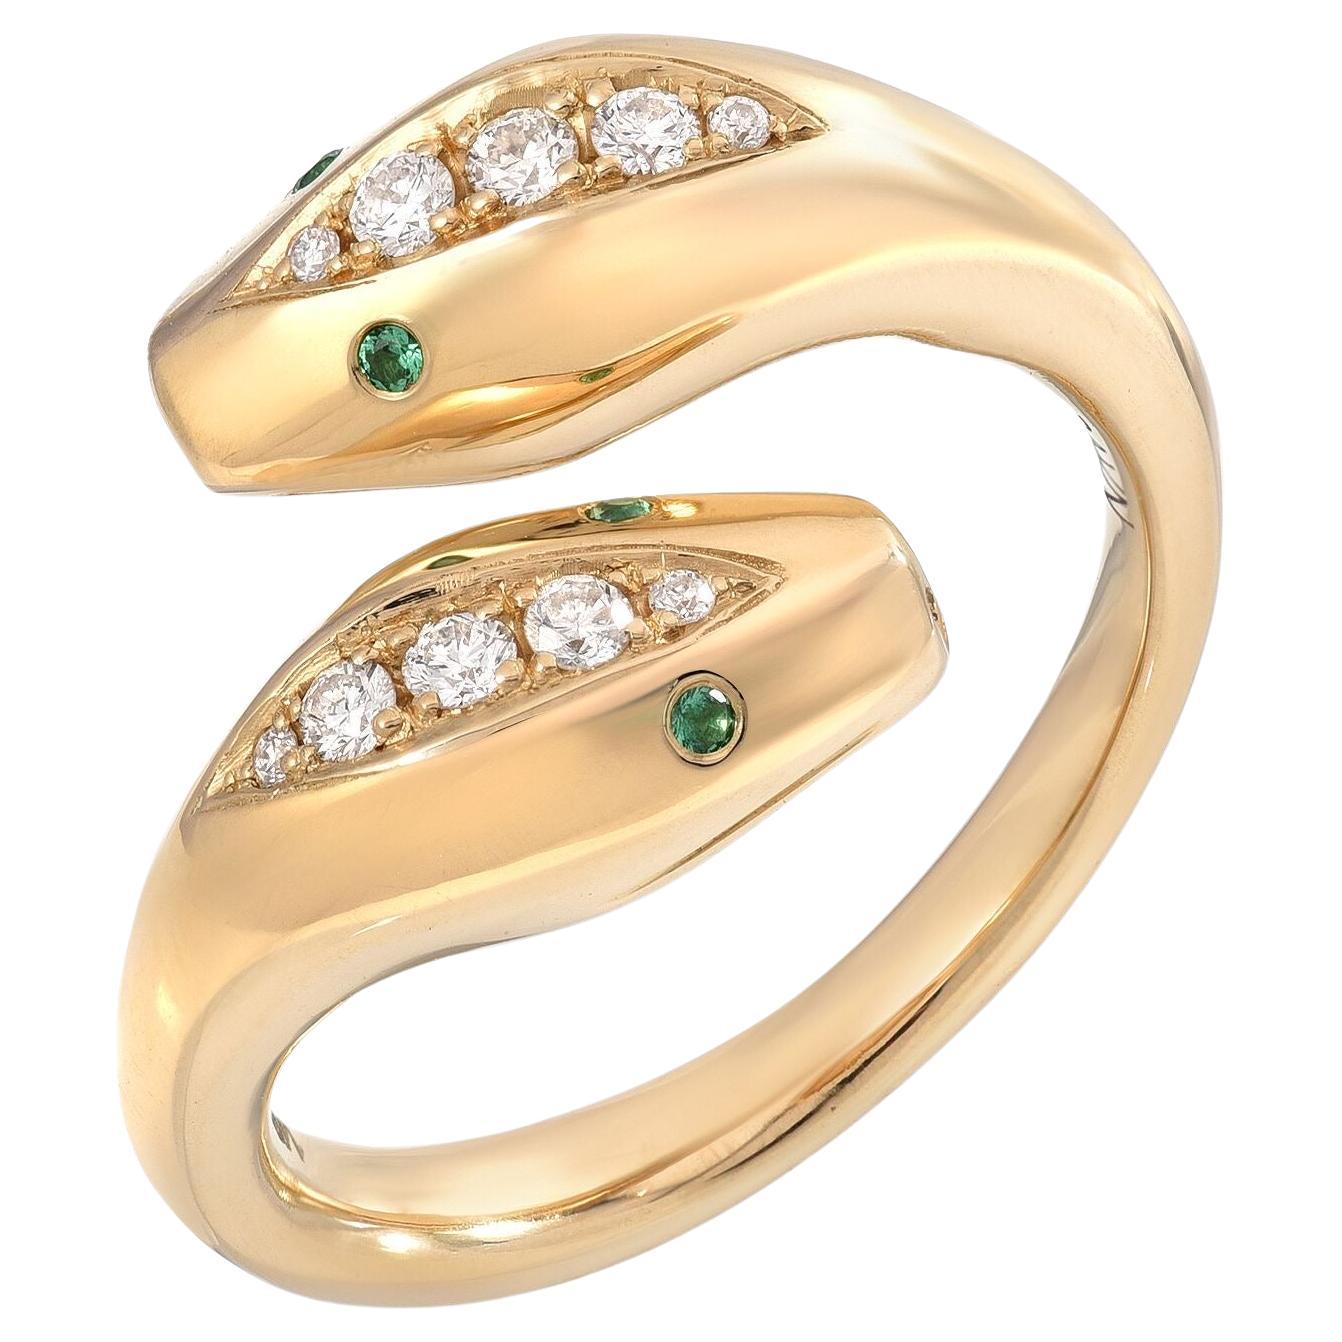 For Sale:  House of RAVN, 14k Gold 2 Headed Serpent Wrap Ring w/ Emerald & Diamond details